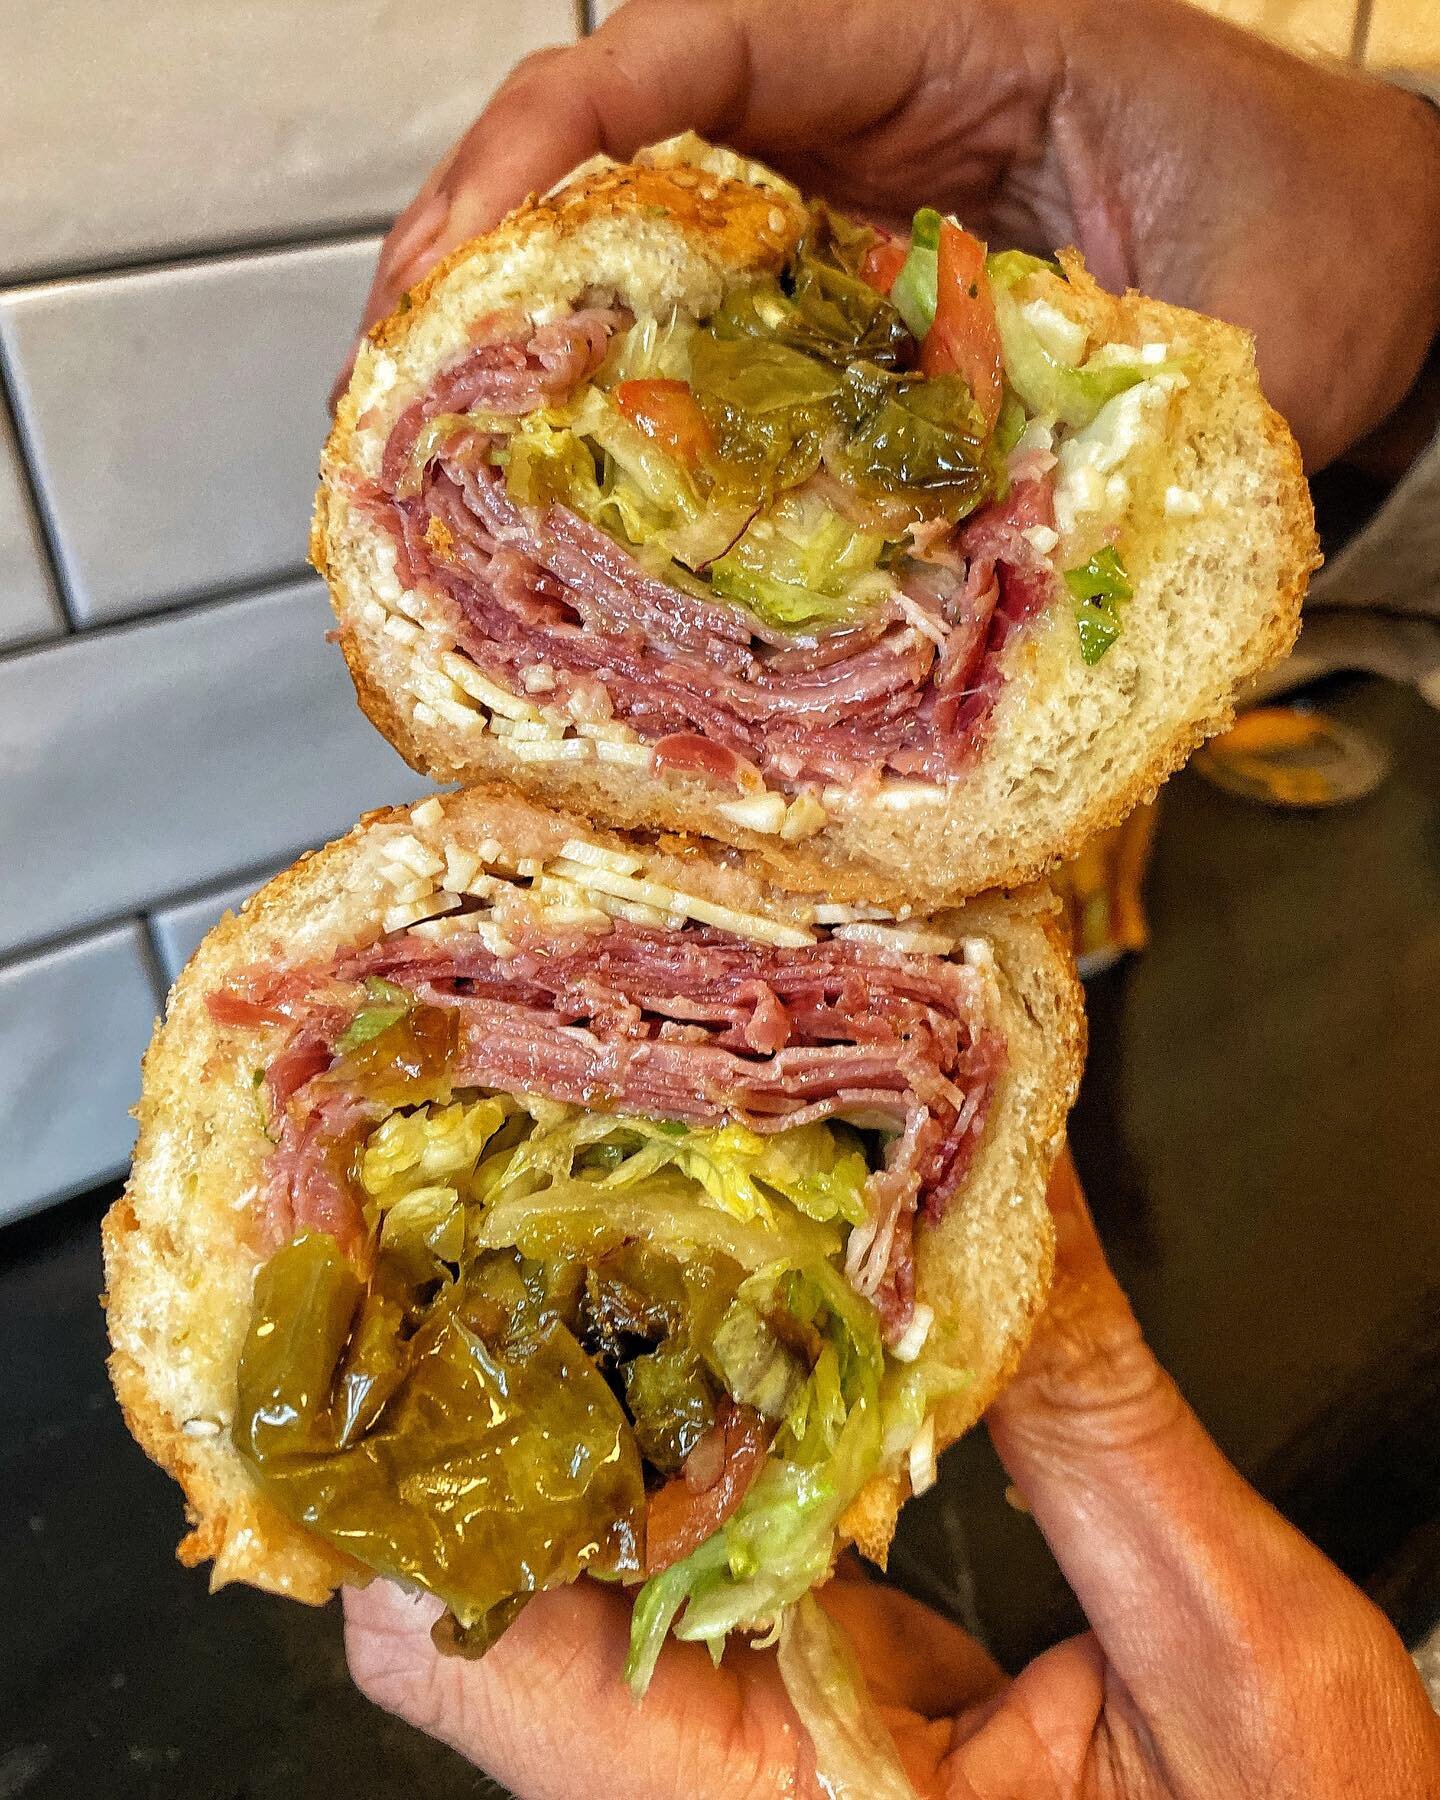 Pick up a delicious HOAGIE! 🤤
🇮🇹 On WEDNESDAY, get a medium ITALIAN HOAGIE only $6.95
‼️ WILLIAMSBURG LOCATION, UNTIL SOLD OUT‼️
#FEDOROFFS
_________________
📦 NATIONWIDE SHIPPING available via @GOLDBELLY‼️
🔗 Order ONLINE in our INSTAGRAM BIO or